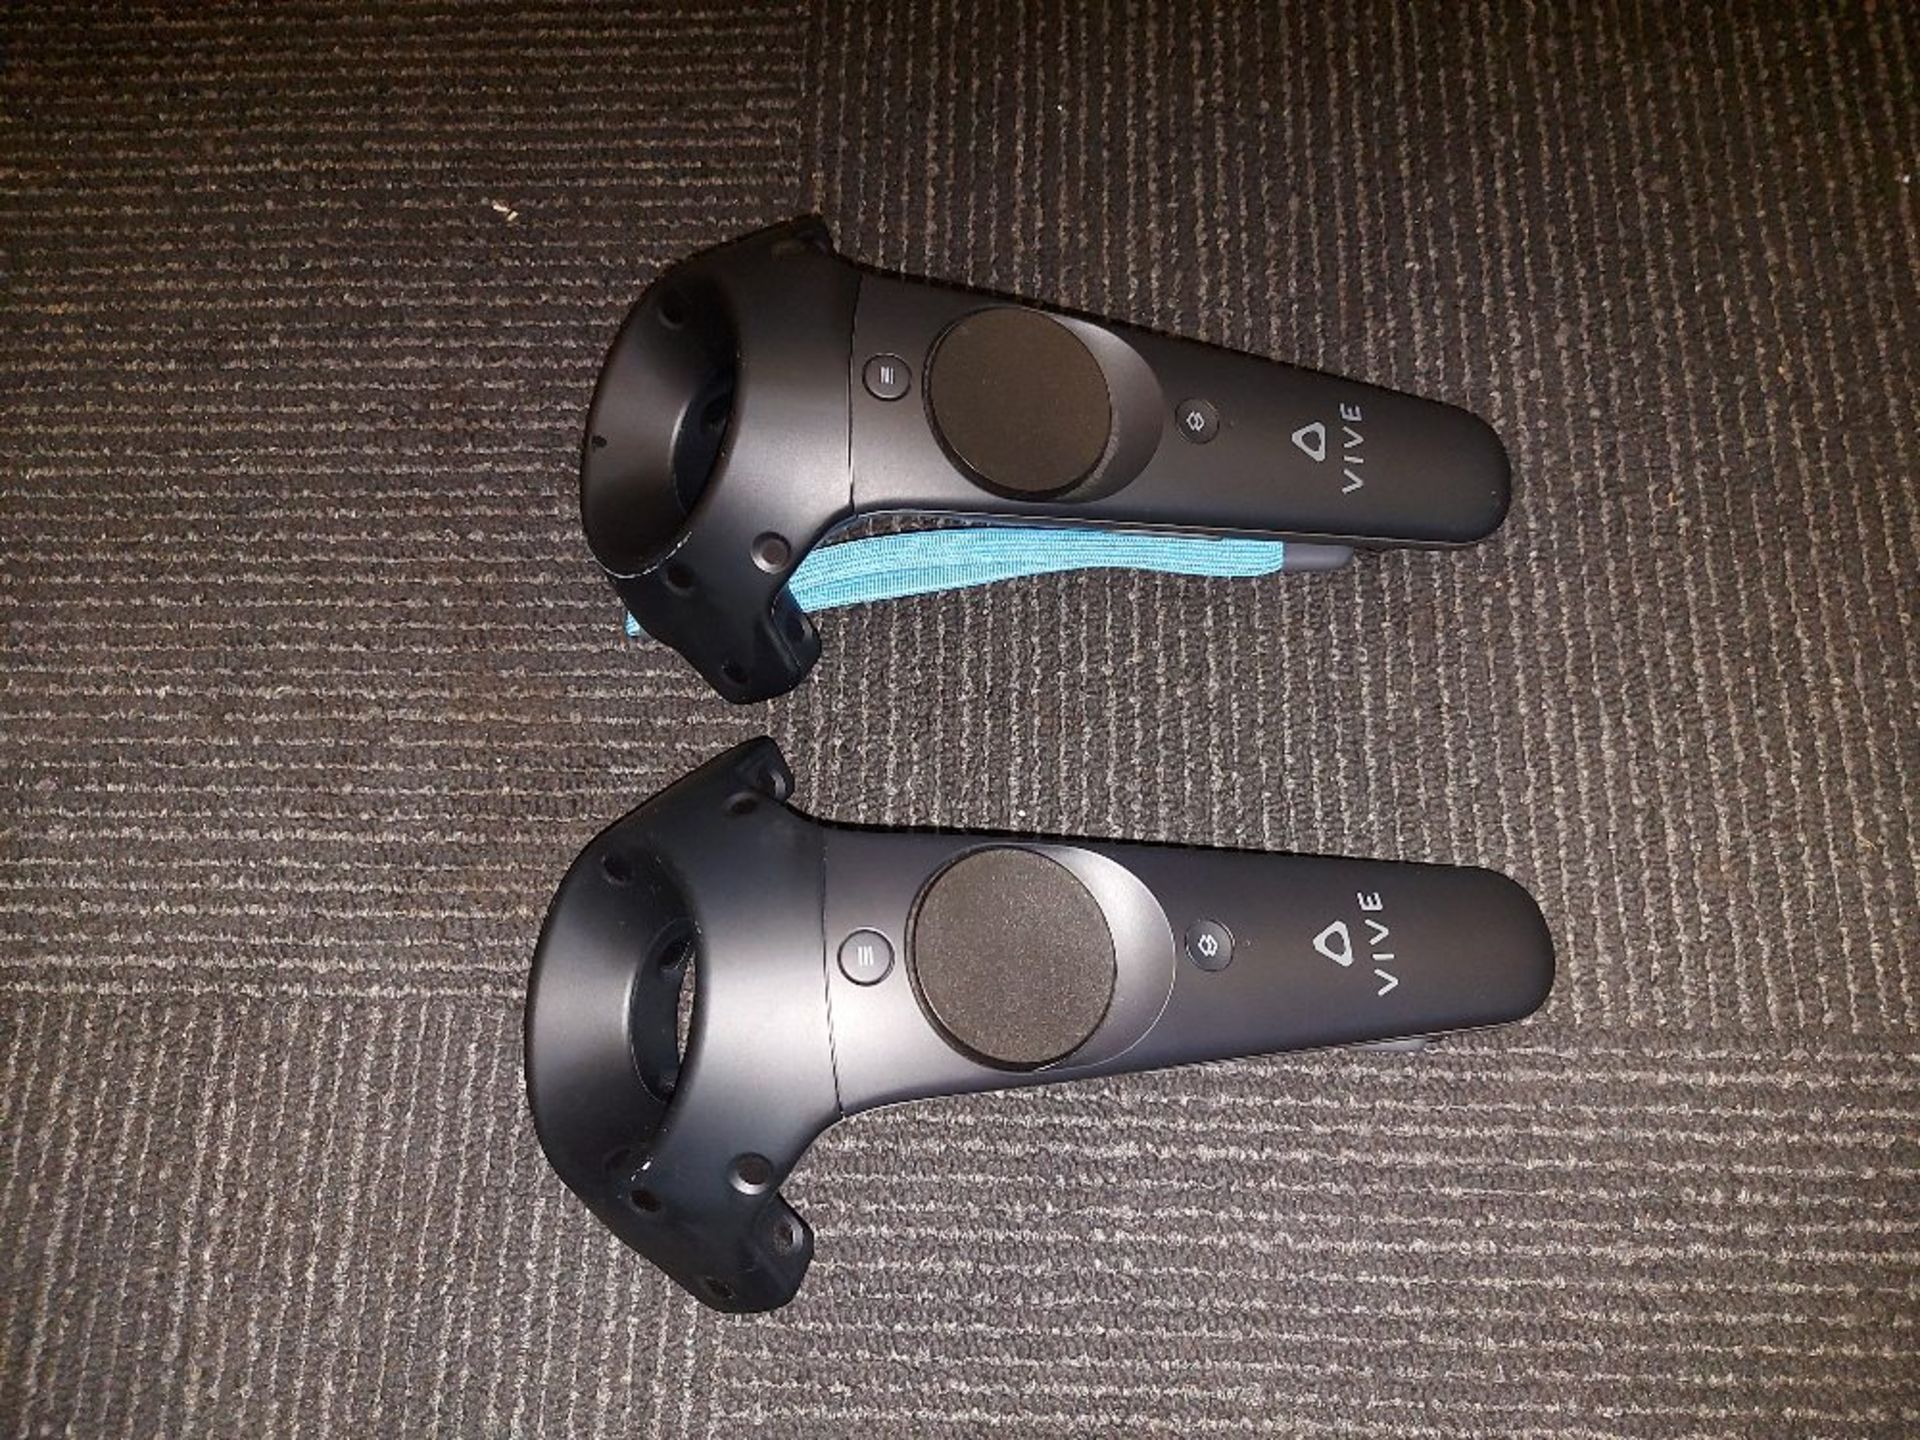 HTC Vive Virtual Reality Headset with (2) Handheld Controllers - Image 5 of 5